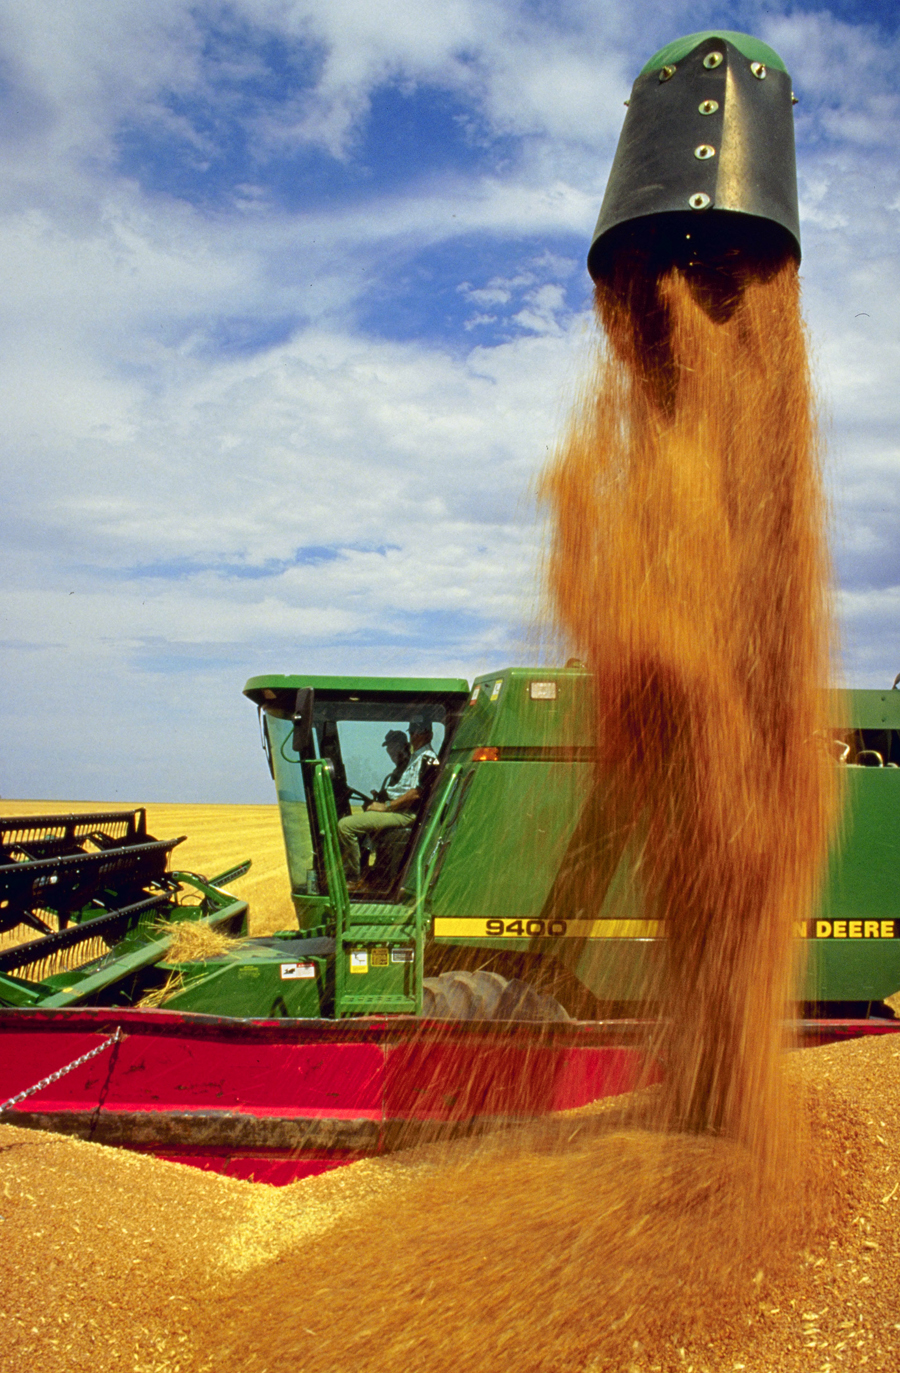 High yields and big variations in the price offered to farmers in the Texas Rolling Plains have contributed to gluts of wheat at co-op elevators. (U.S. Department of Agriculture photo by Scott Bauer)